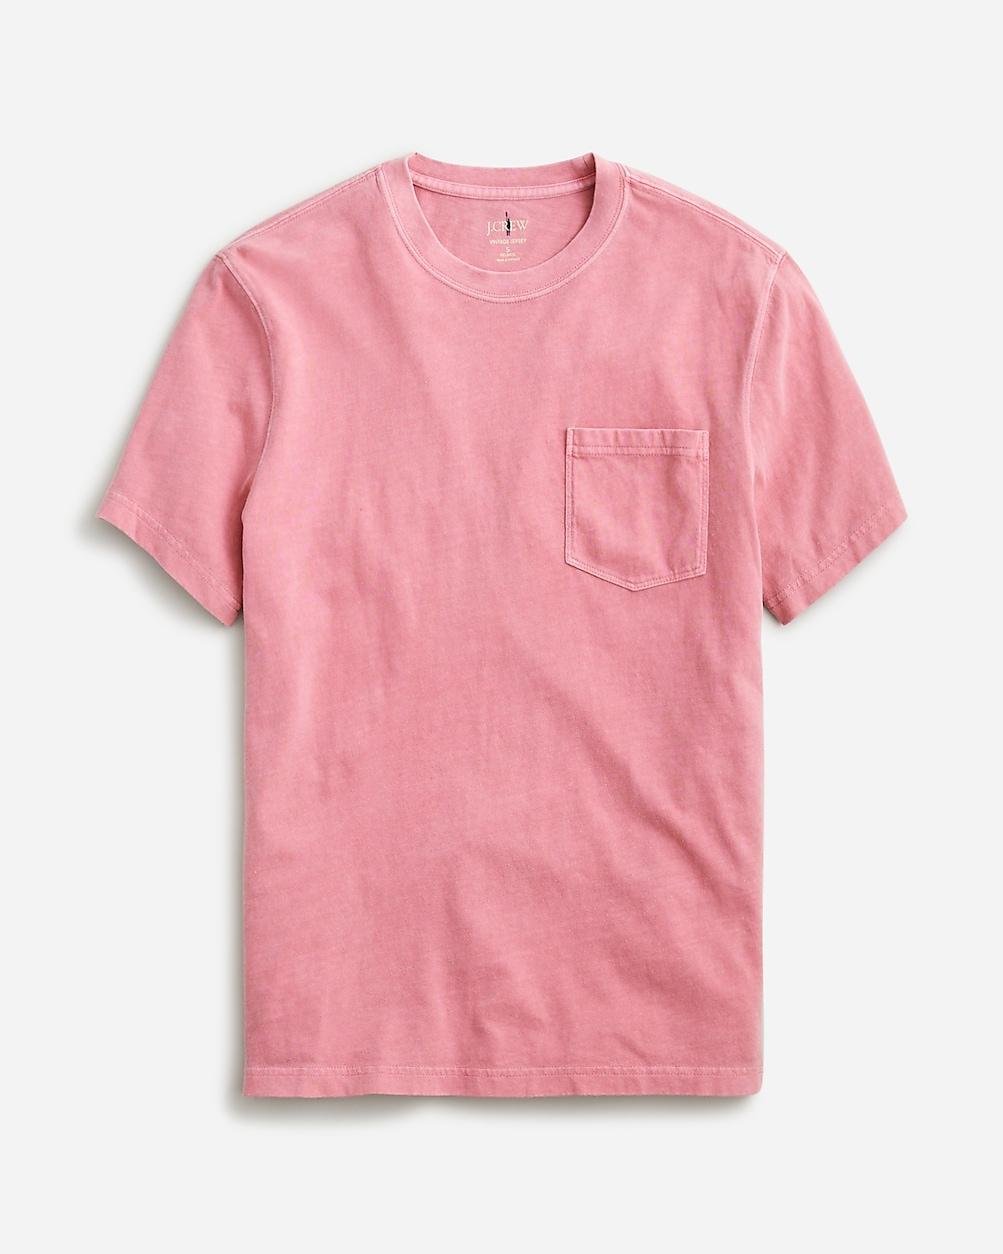 Tall vintage-wash cotton pocket T-shirt by J.CREW